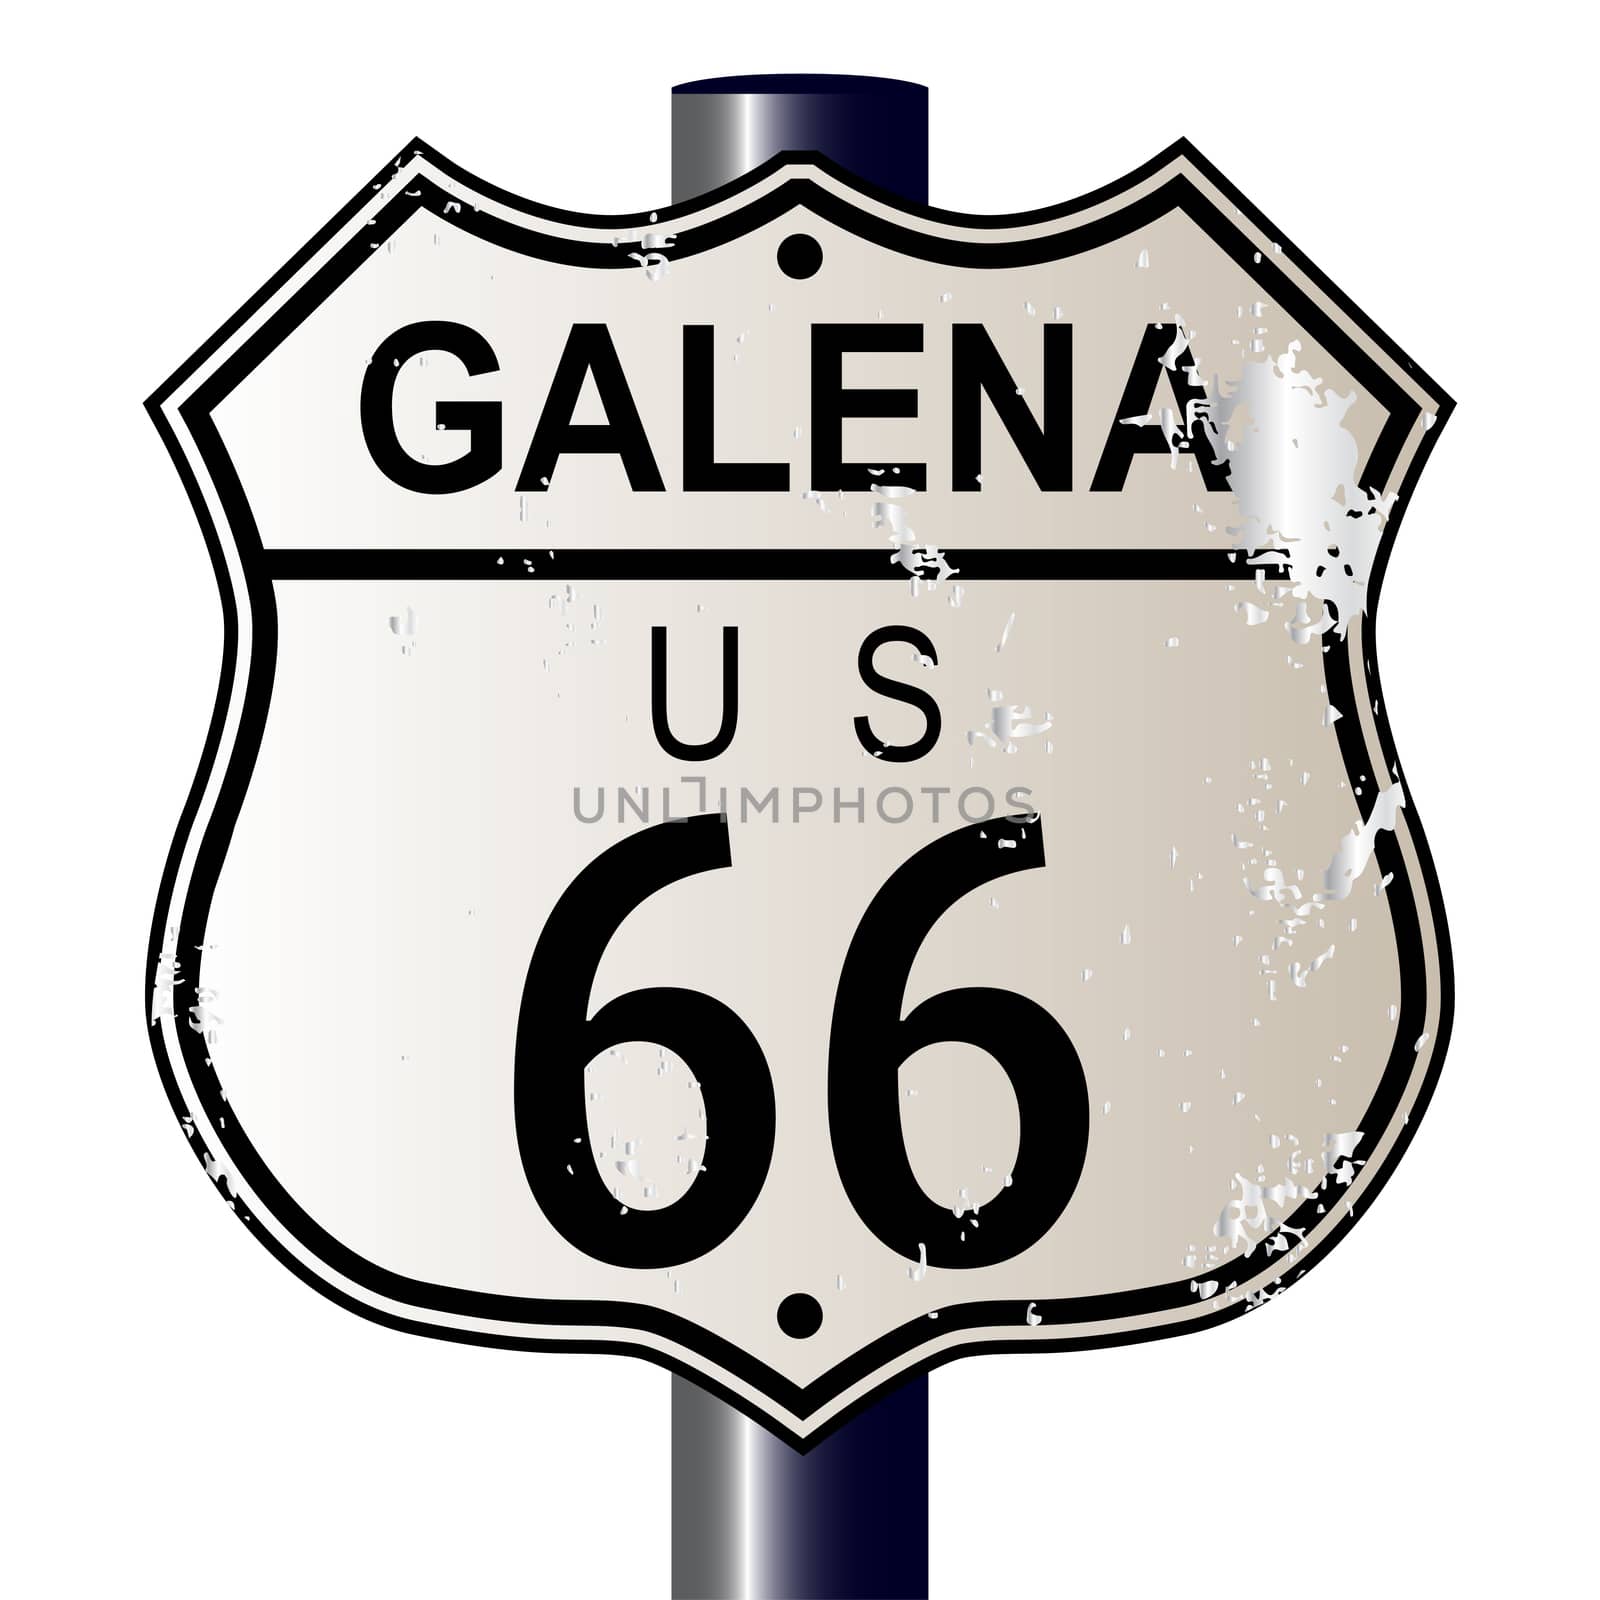 Galena Route 66 traffic sign over a white background and the legend ROUTE US 66